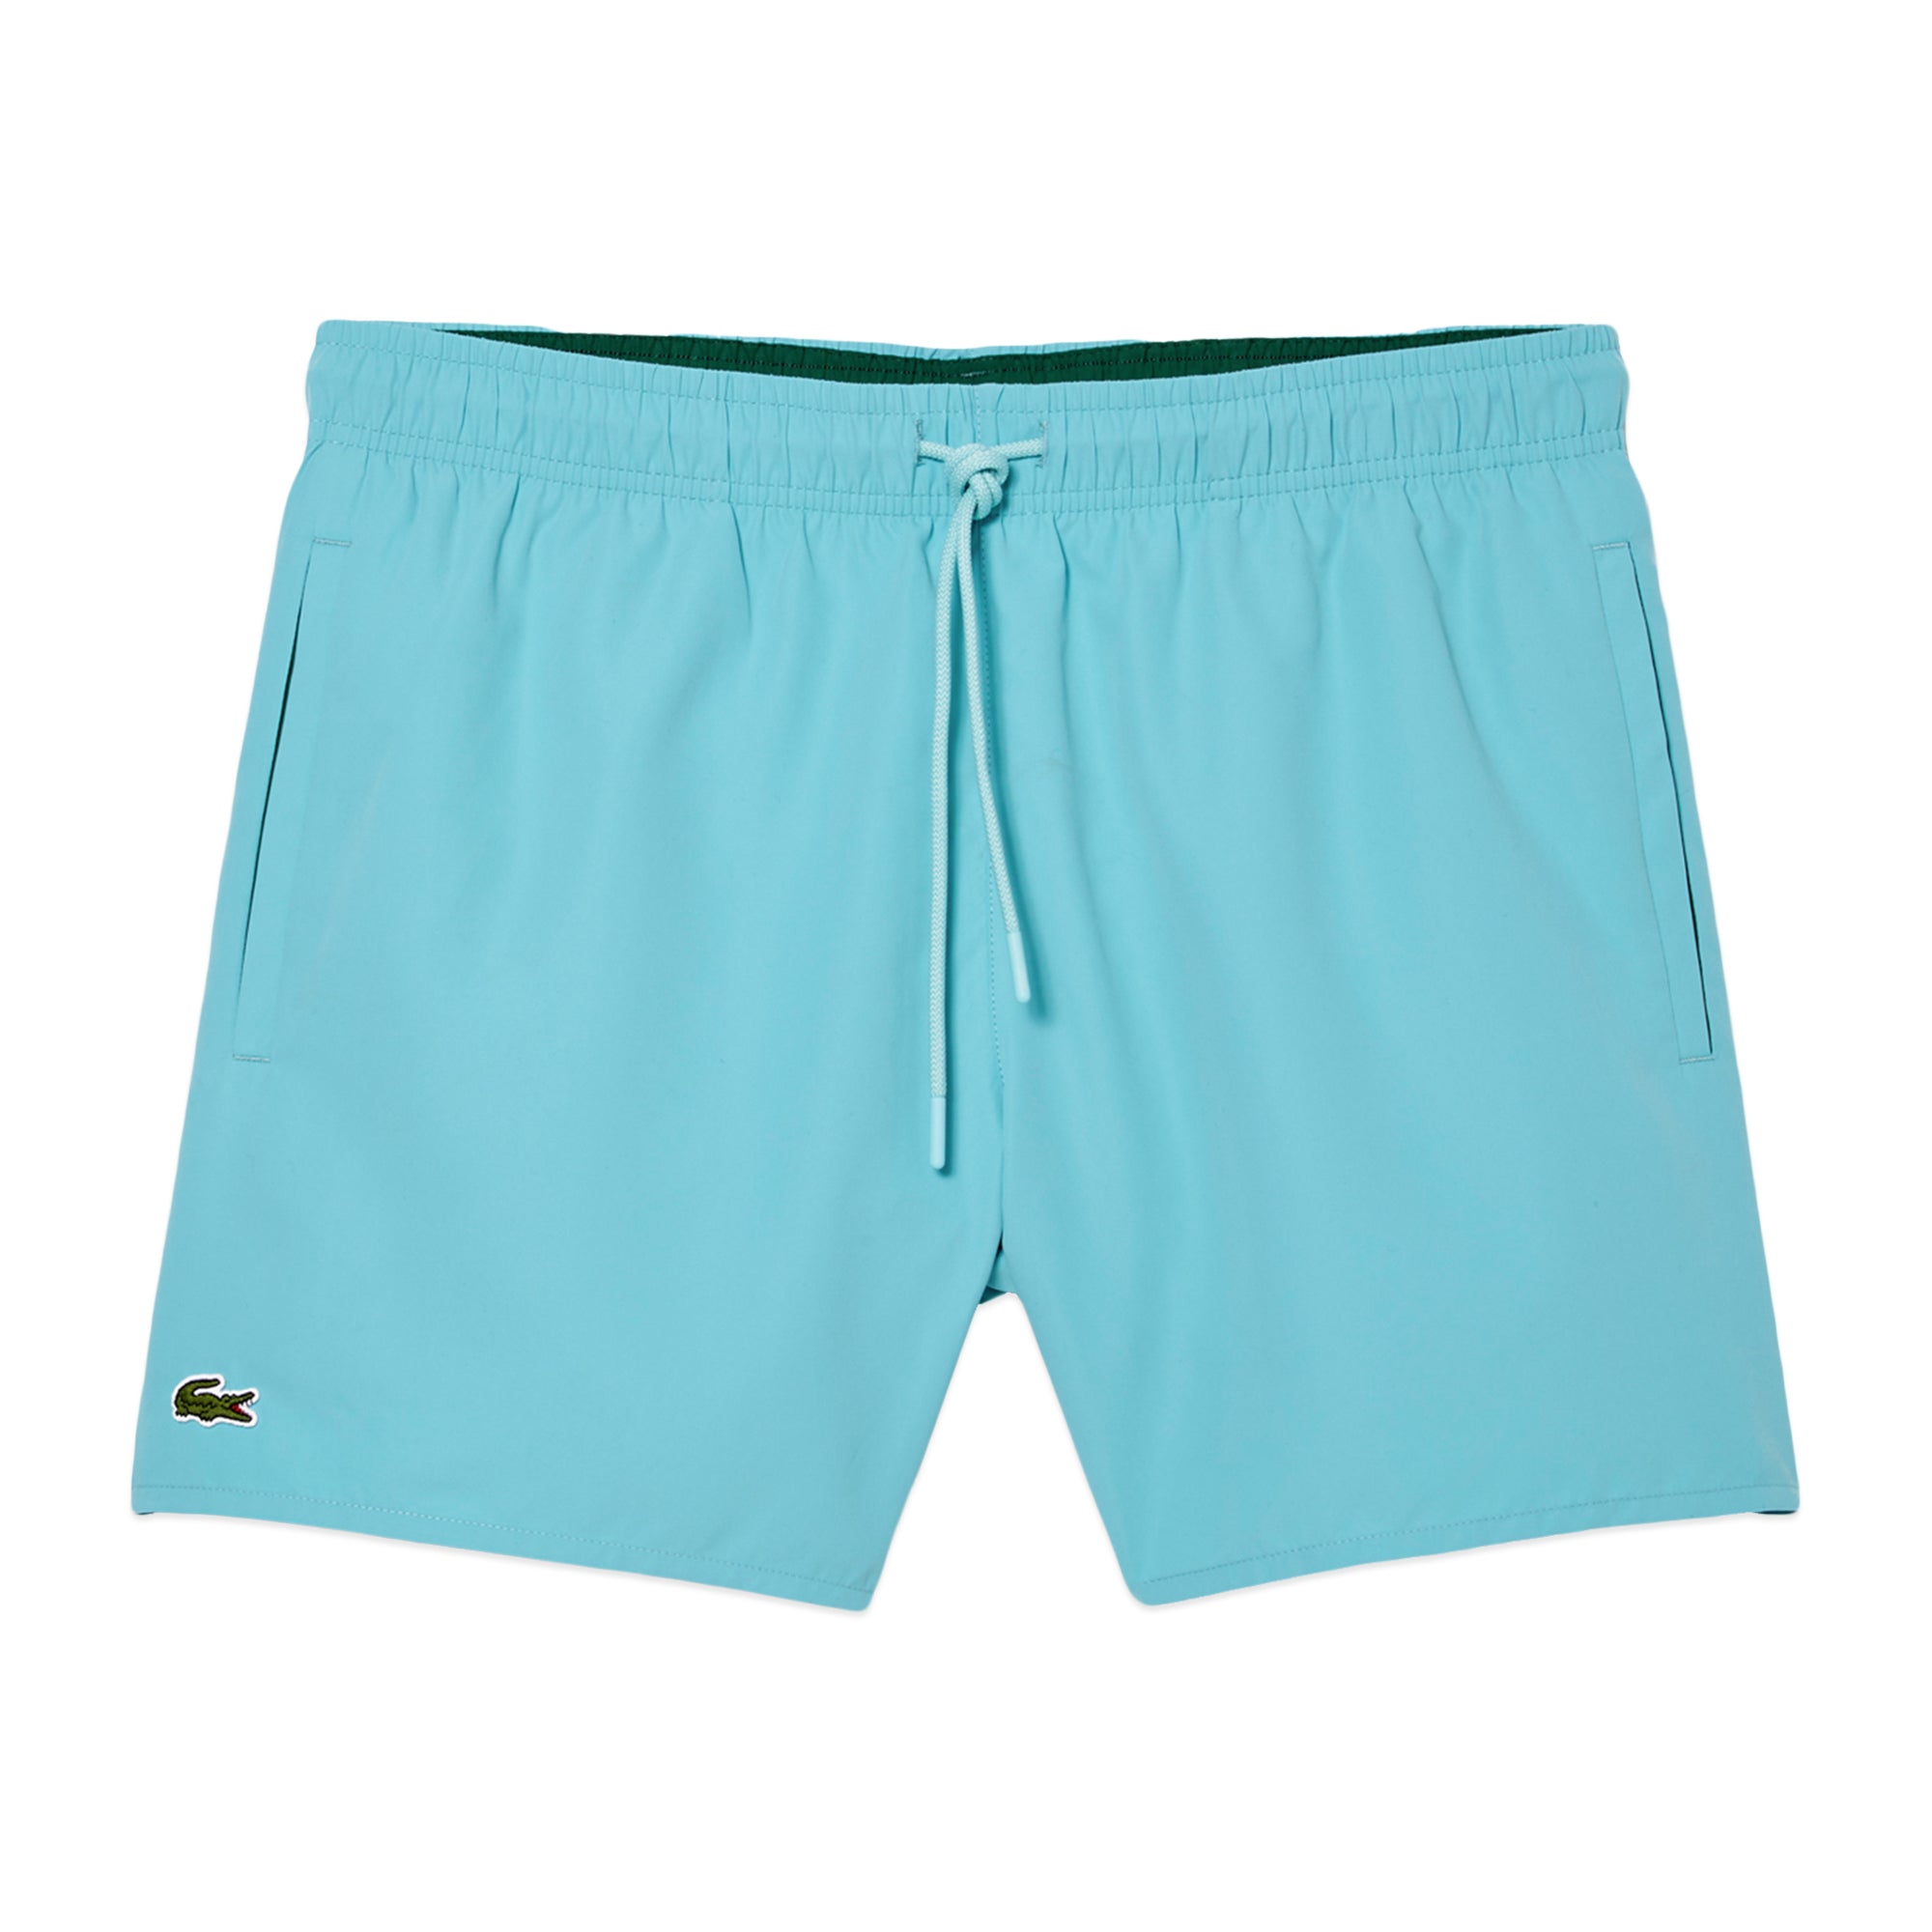 Lacoste Light Dry Shorts MH6270 - Turquoise